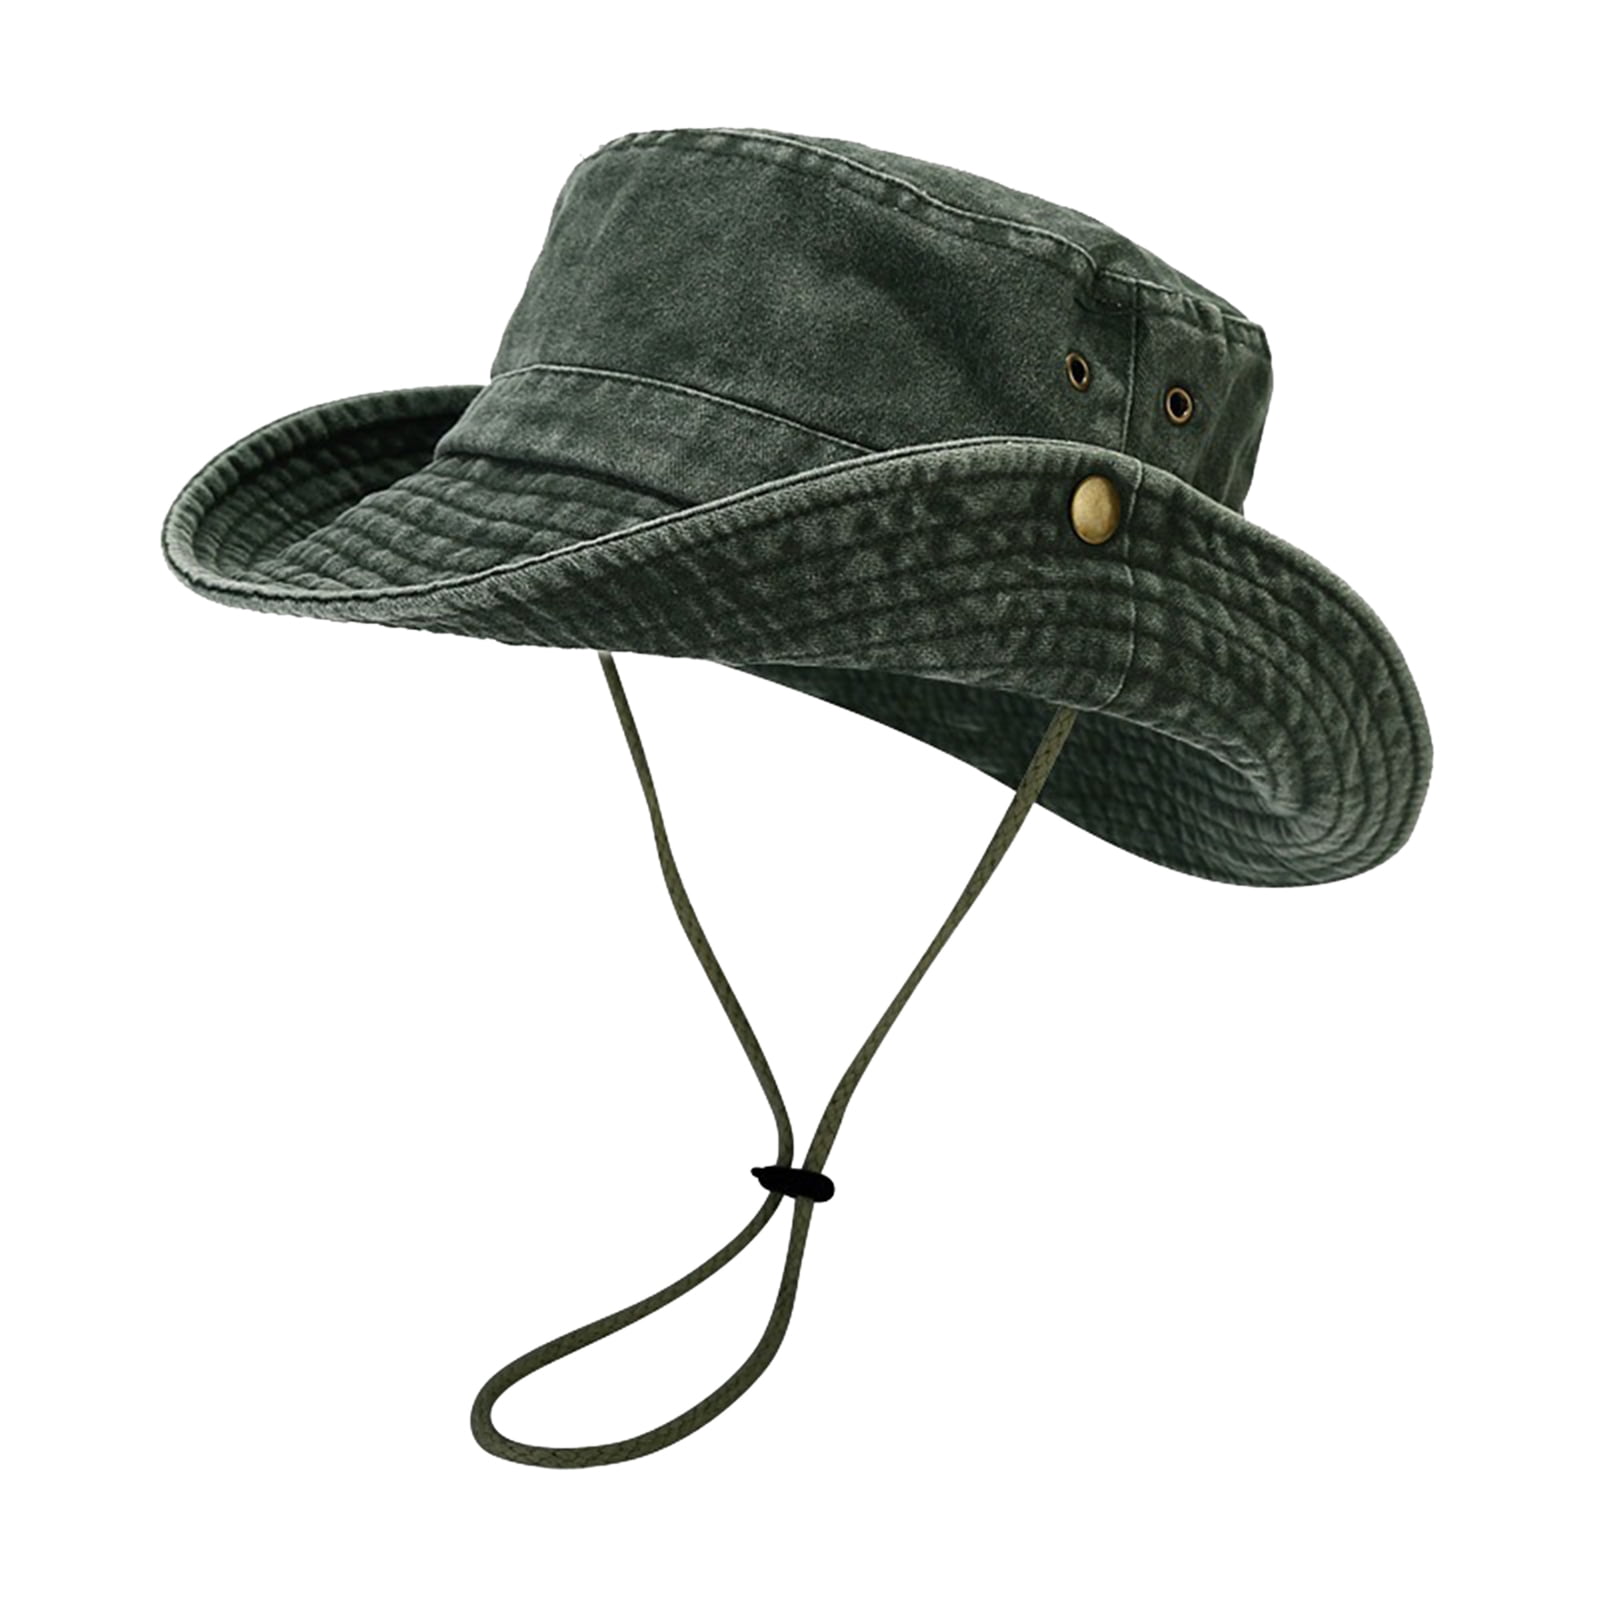 Bucket Hat for Women Cute Breathable Wide Brim Boonie Hat Outdoor Mesh Cap Travel Fishing Cowboy Hat Men Brown, Men's, Size: One size, Silver